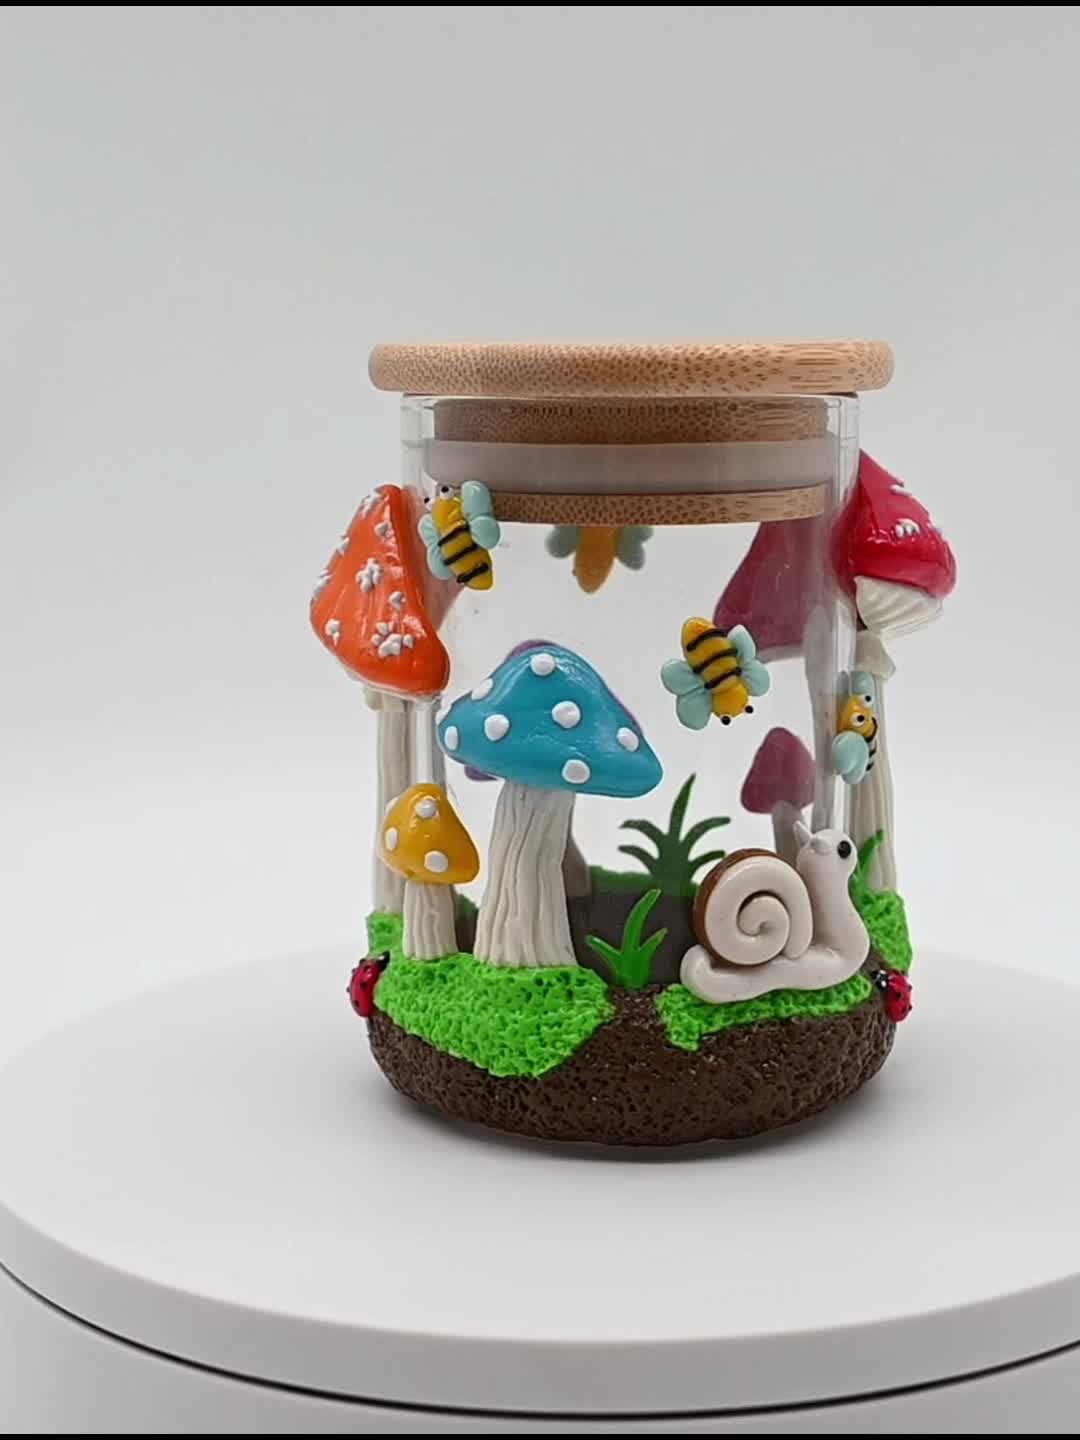 1pc Hand Painted,3D Cartoon Cute Mushroom Candy Jar, Clay Candy Jar, Cartoon Candy Jar With Lid, Glass Candy Jar, Home Storage Box Cookie Jar With Lid, Home Kitchen Accessories,Size 11.5cm/4.5inch